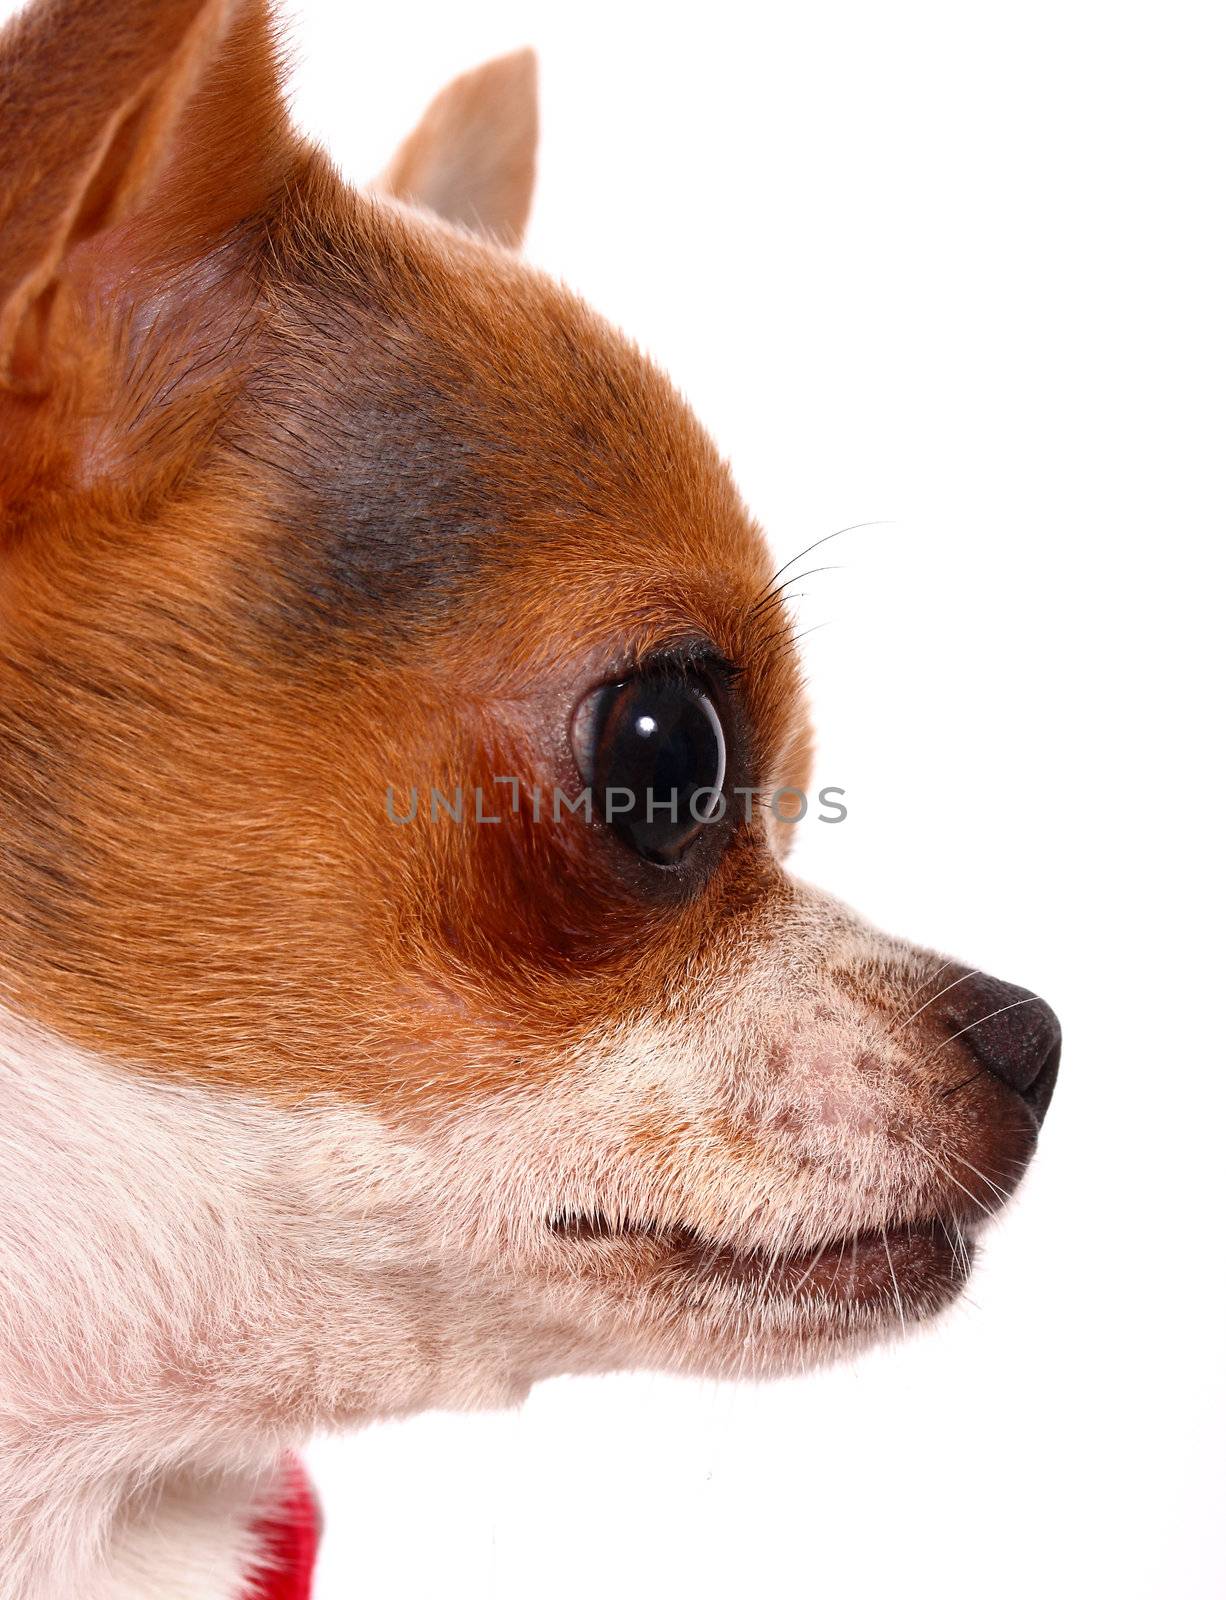 Close Up Of A Pet Chihuahua's Face by stuartmiles